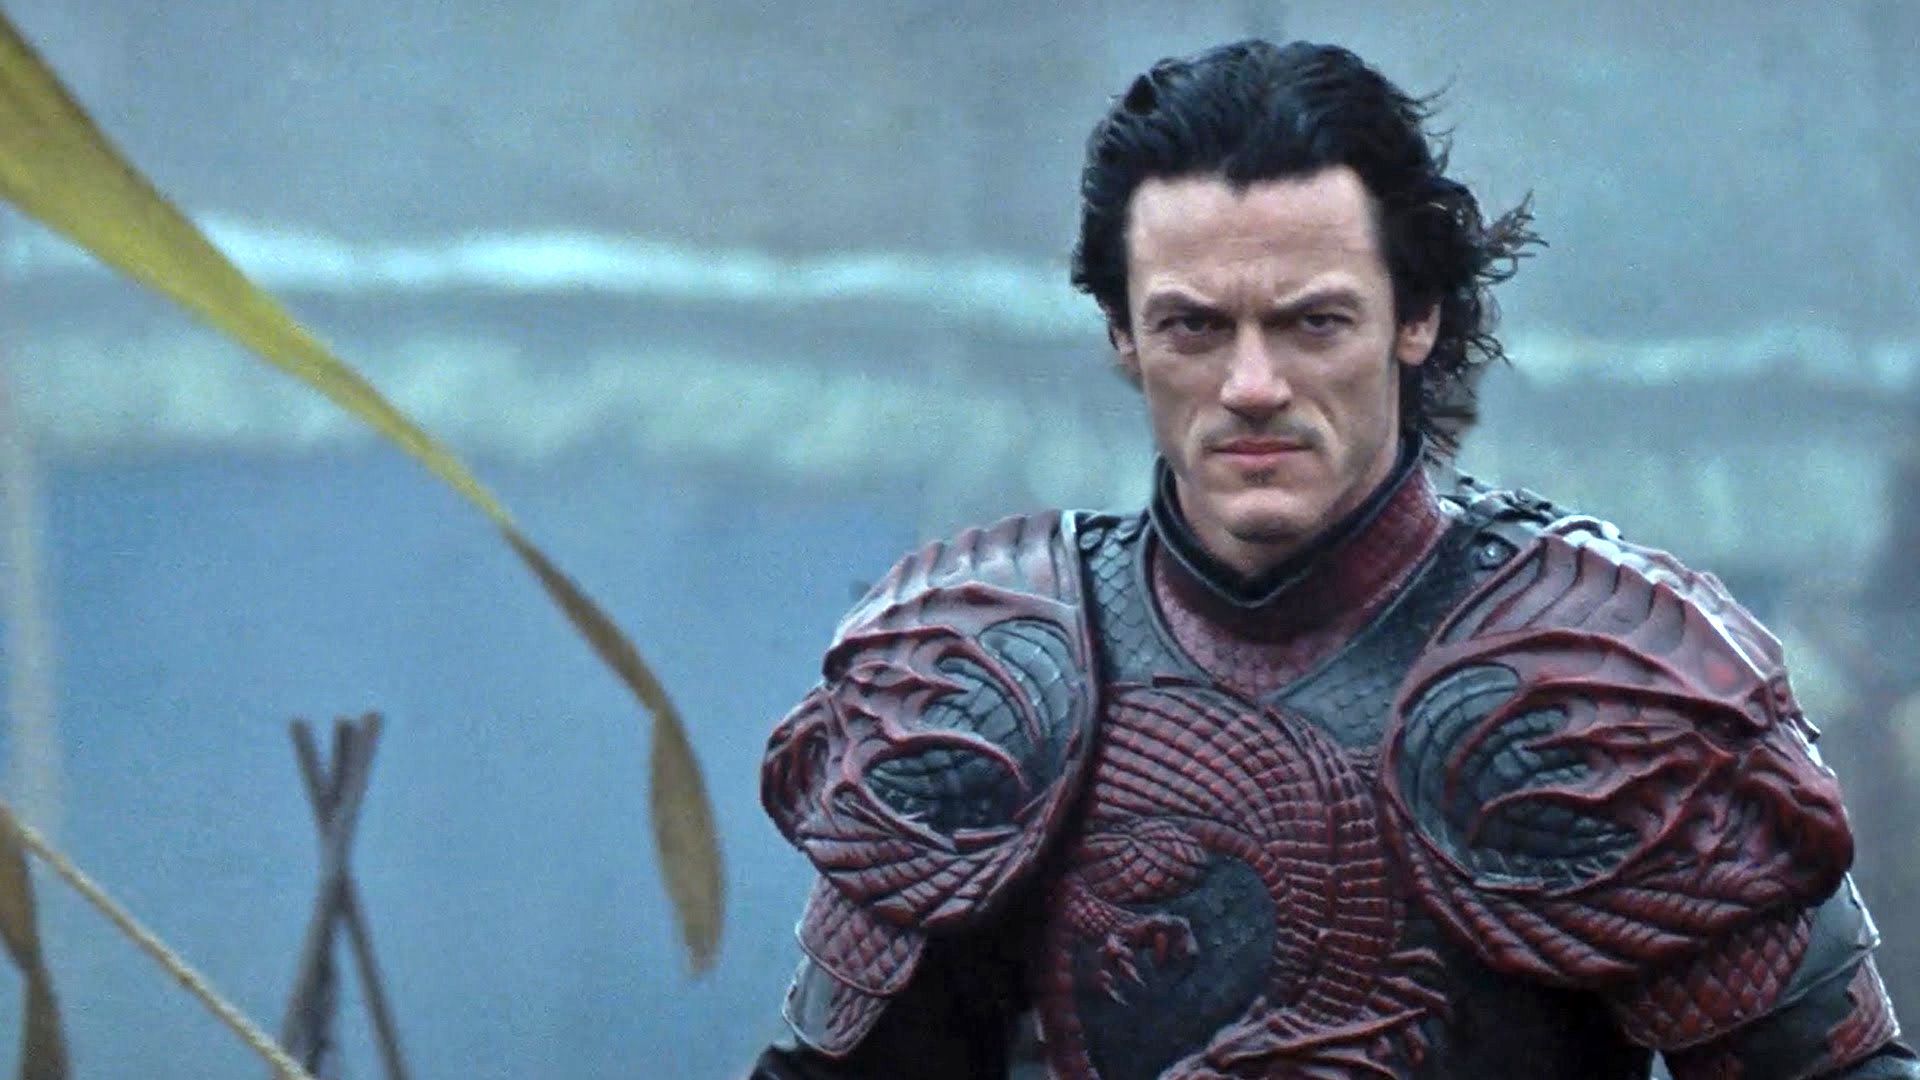 Looking for more vampire movies like Dracula Untold that blend horror, action and history? Check out 5 more awesome flicks we think you’ll love!